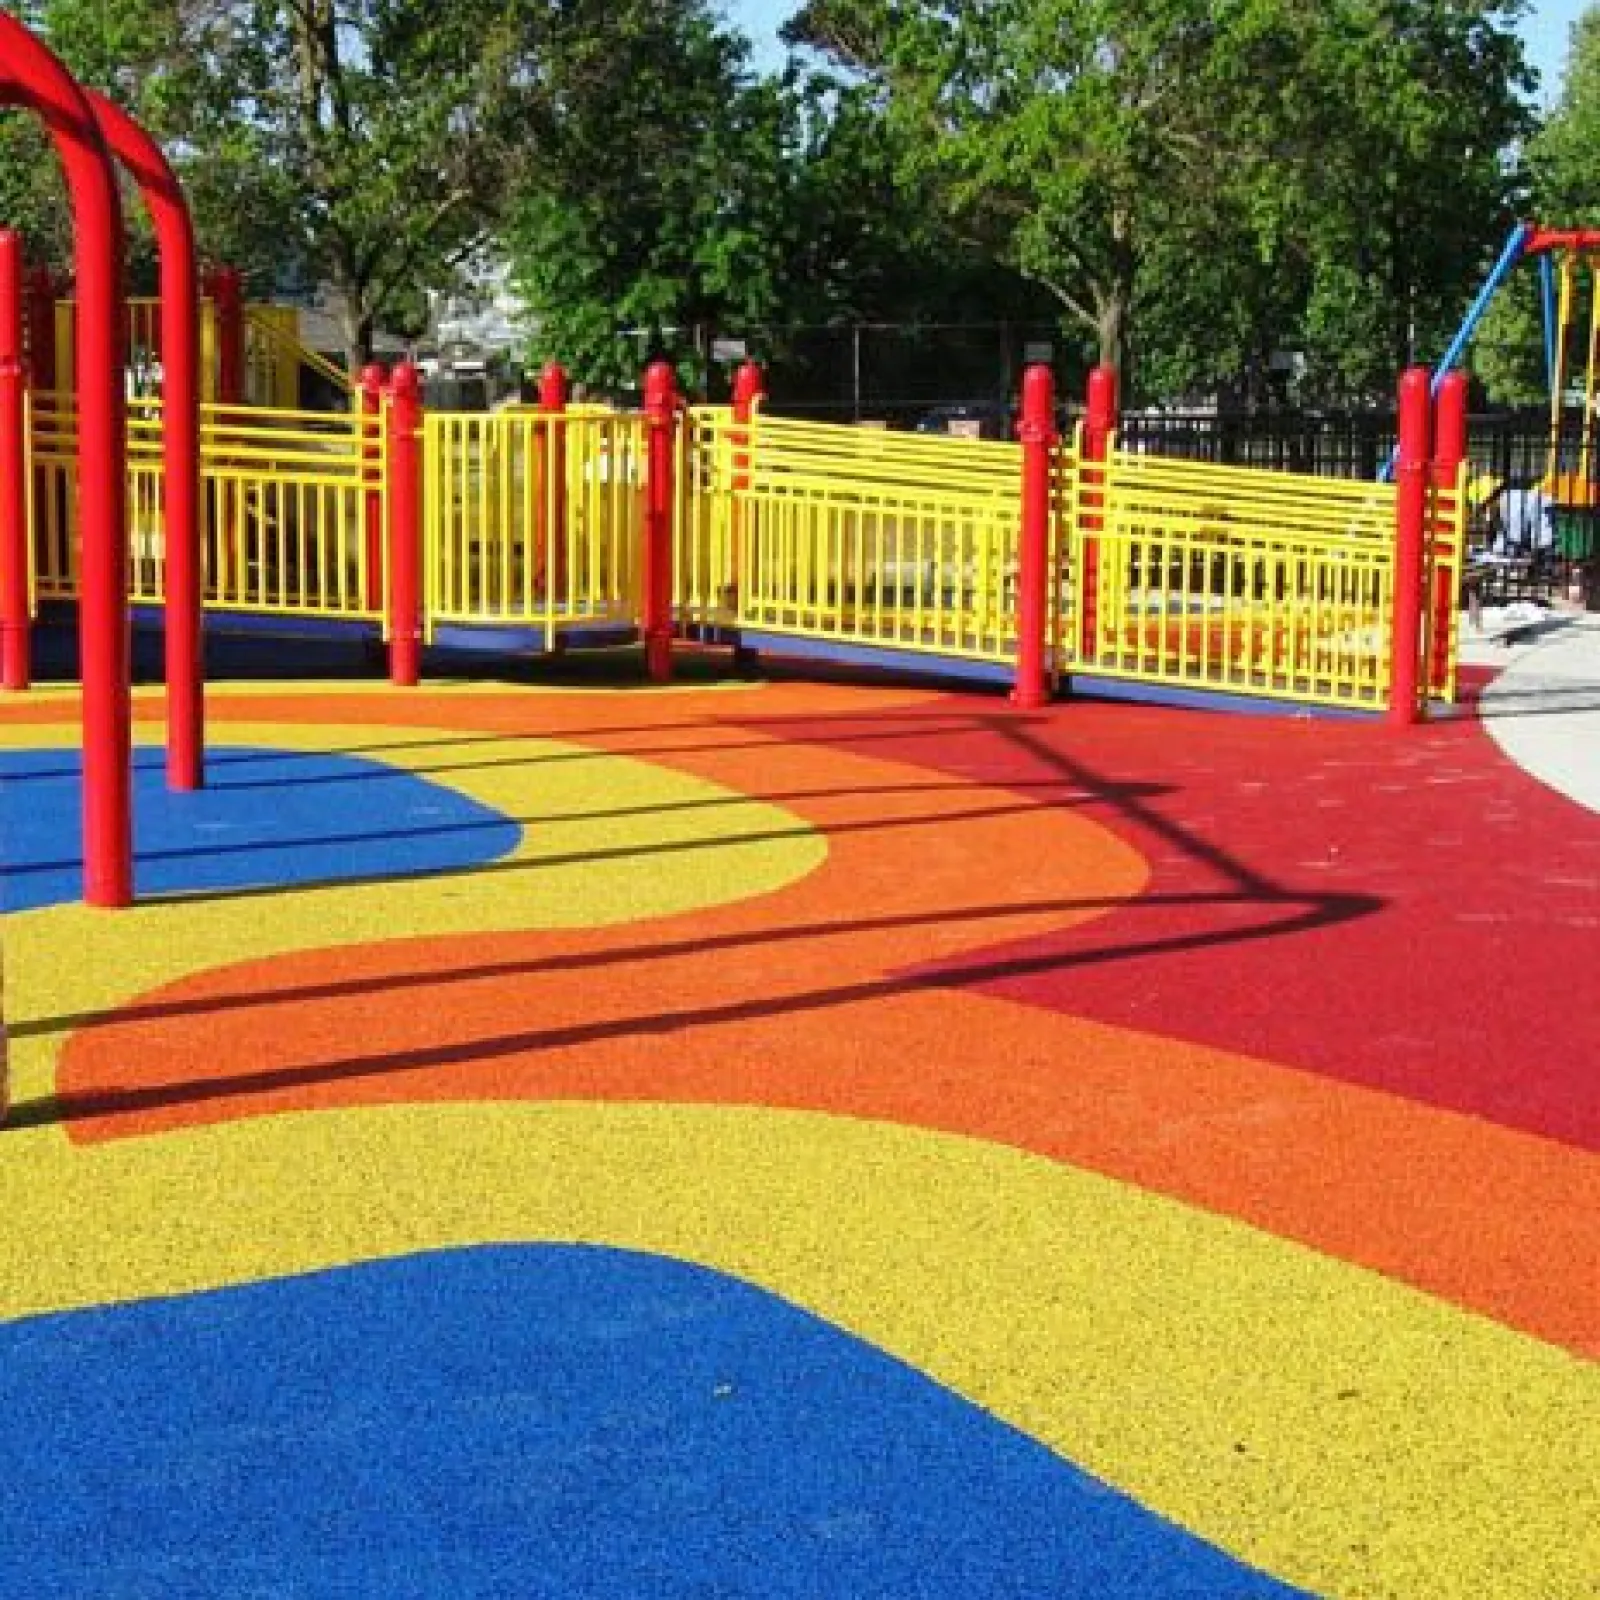 a playground with red and yellow poles